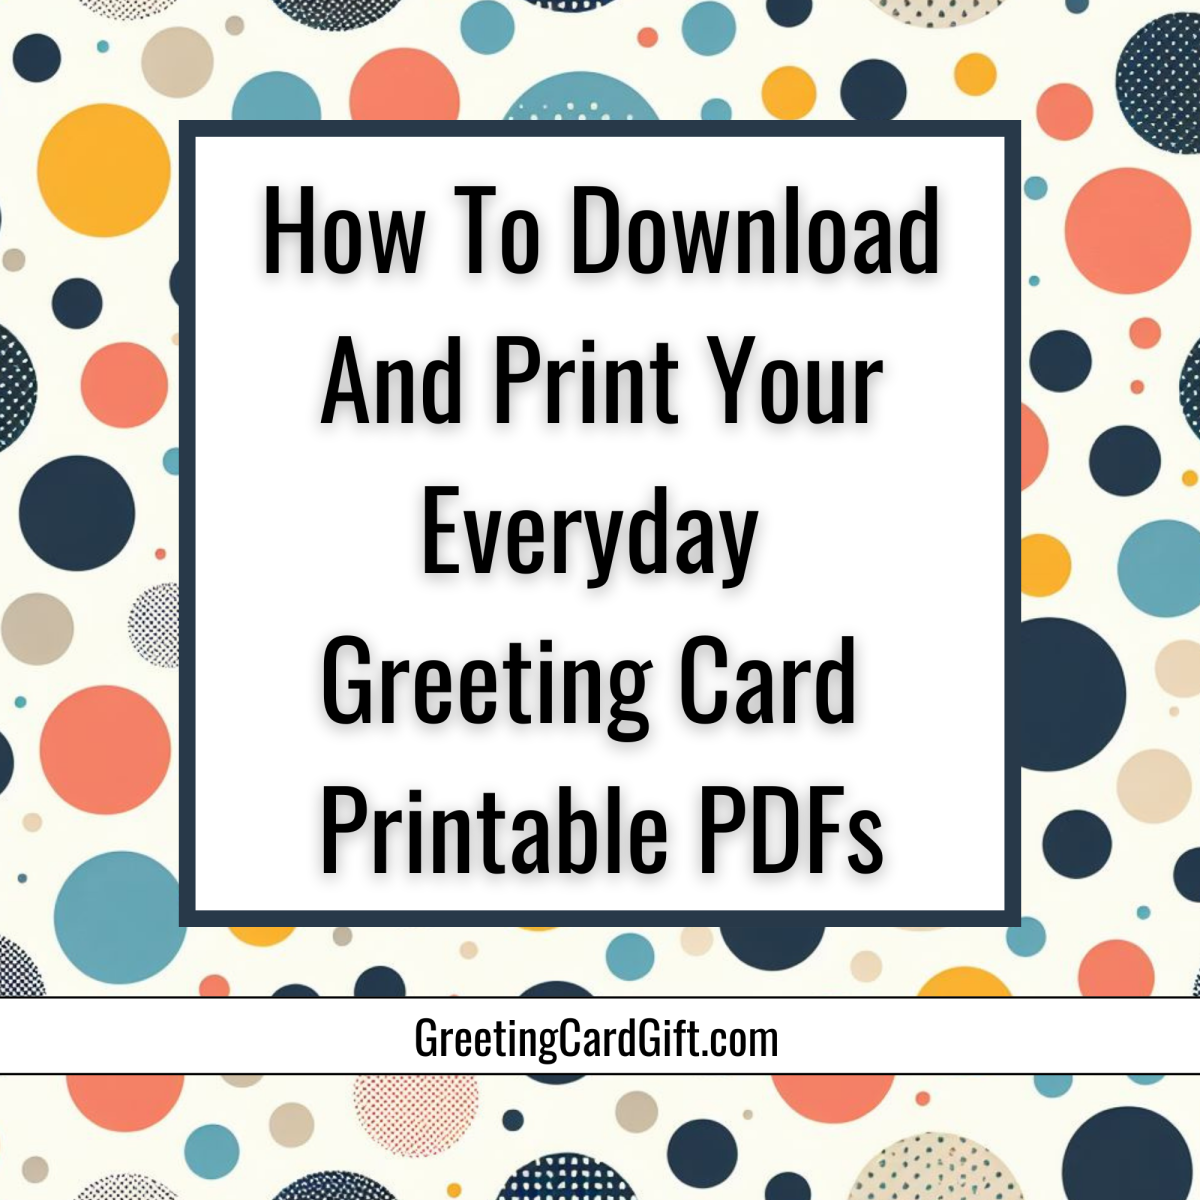 How To Download And Print Your Everyday Greeting Card Printable PDFs